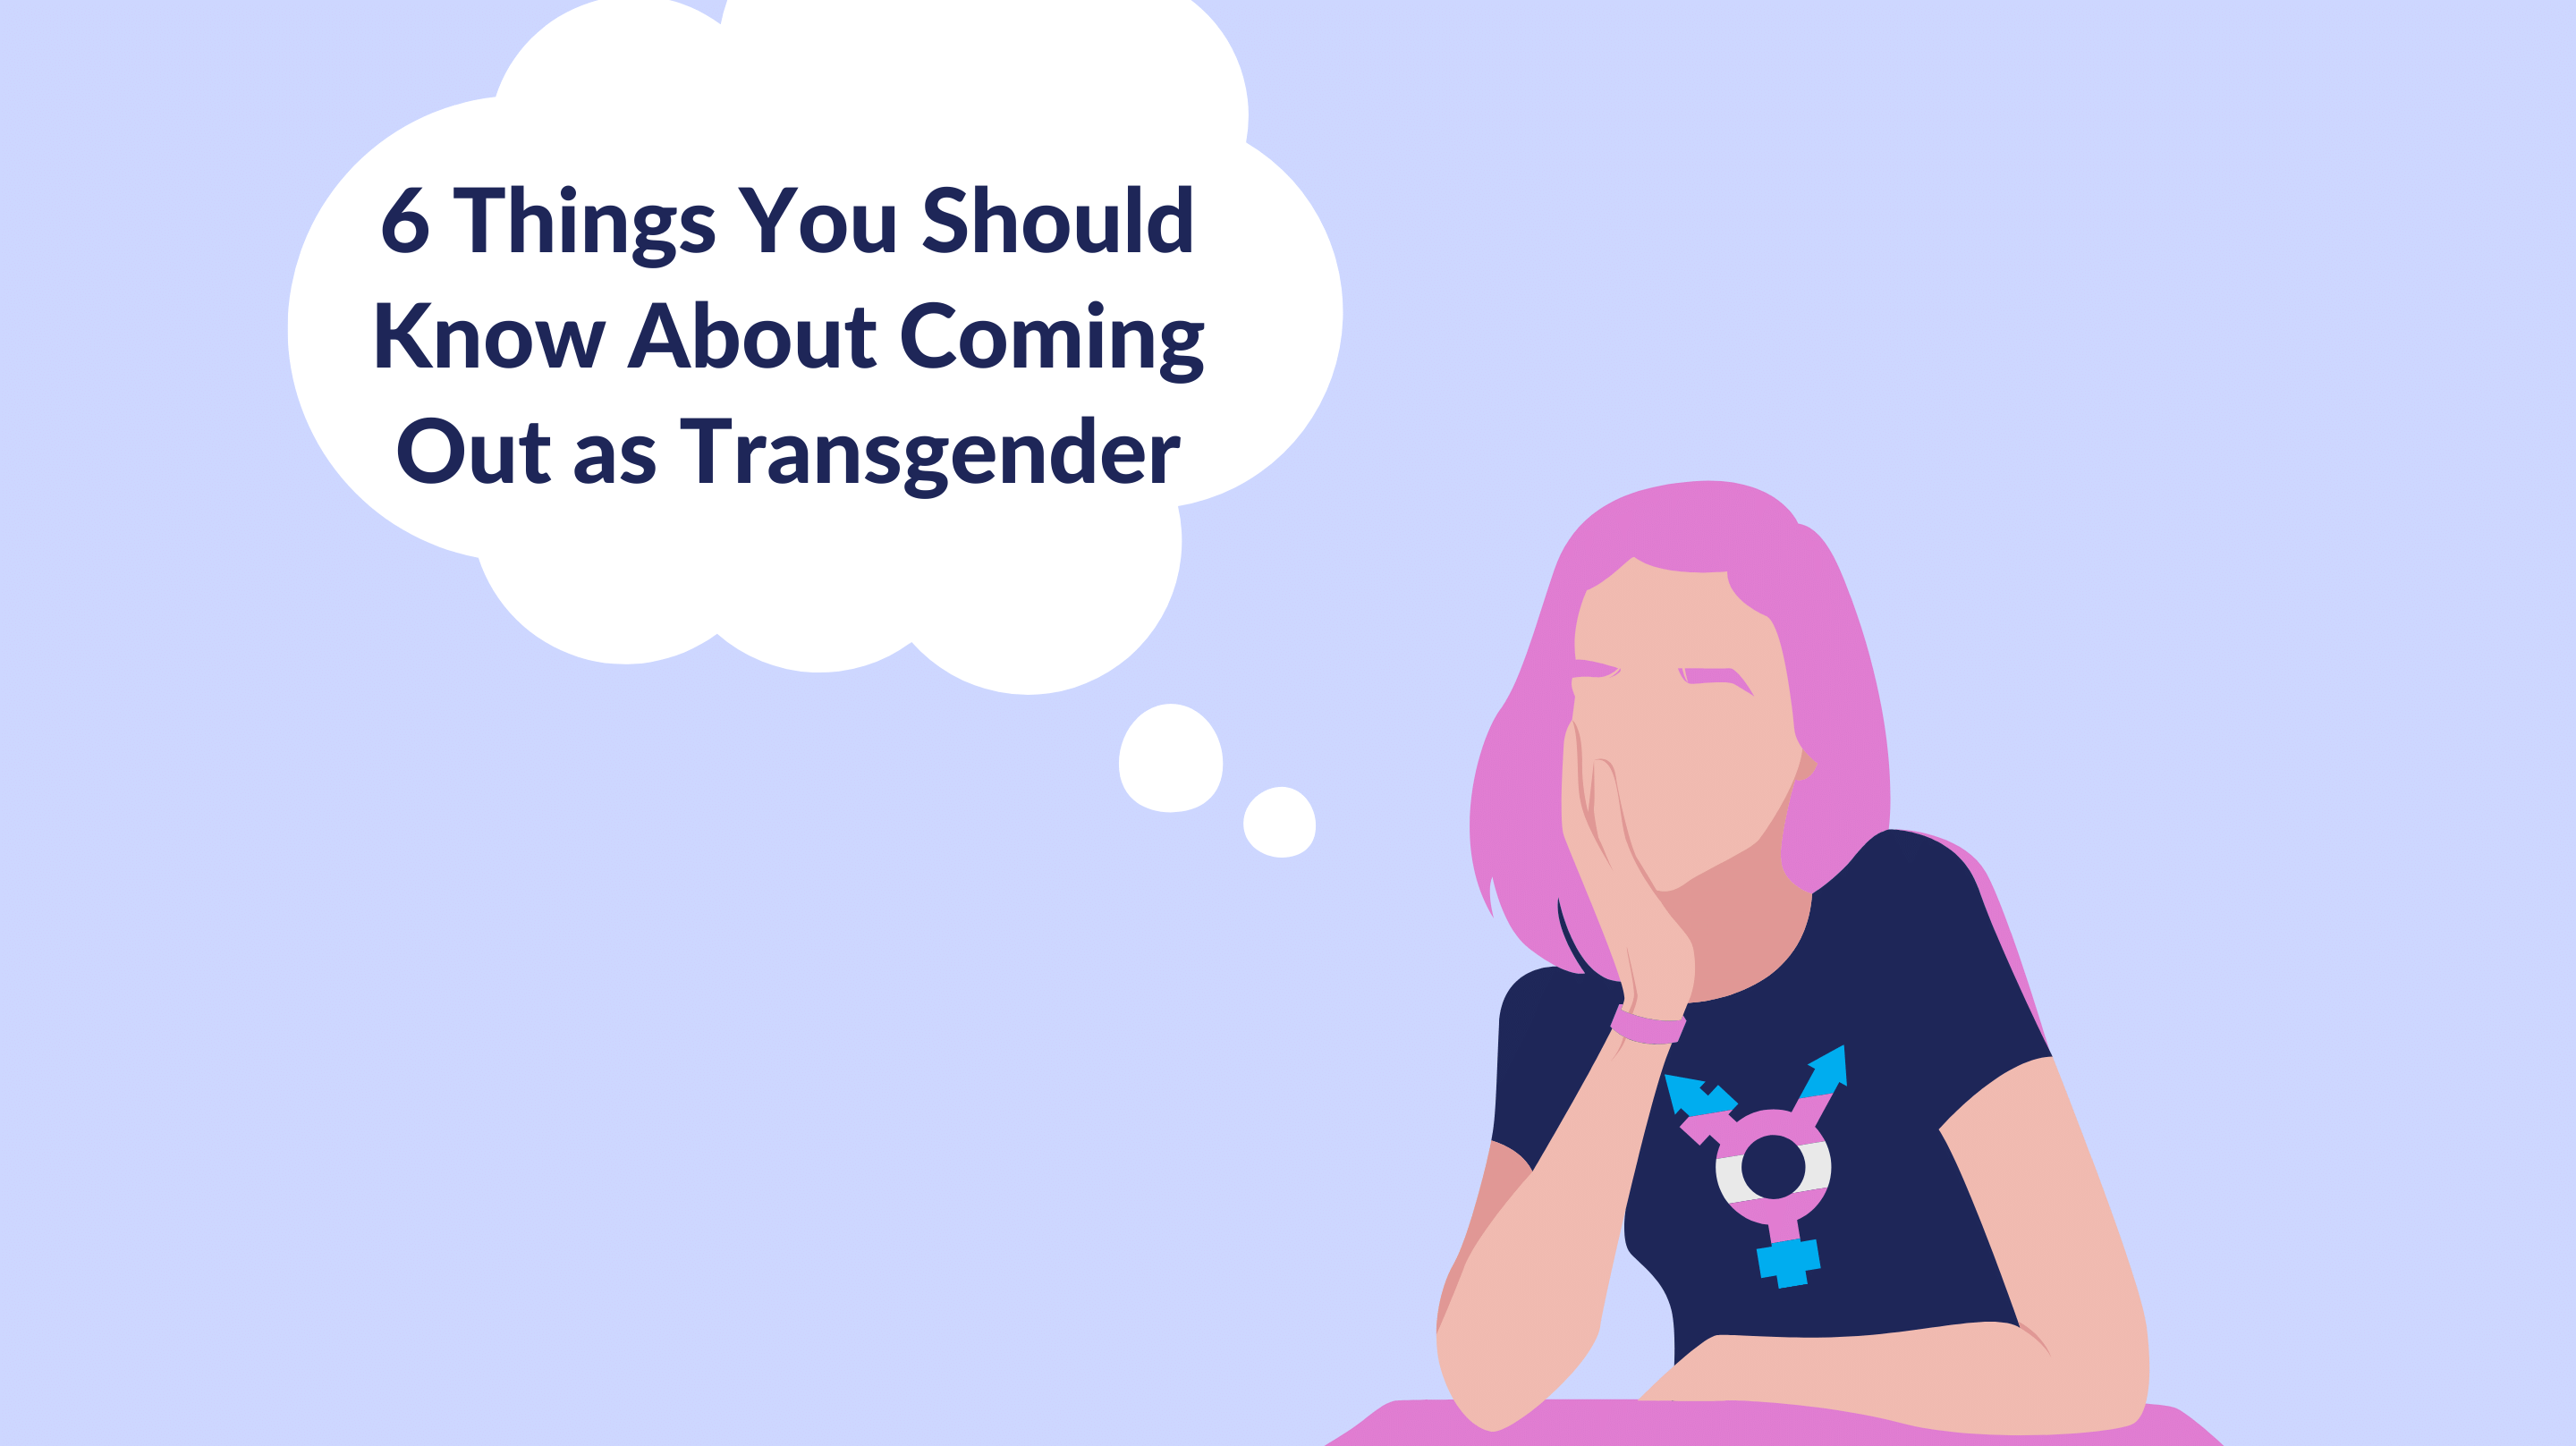 6 Things You Should Know About Coming Out as Transgender